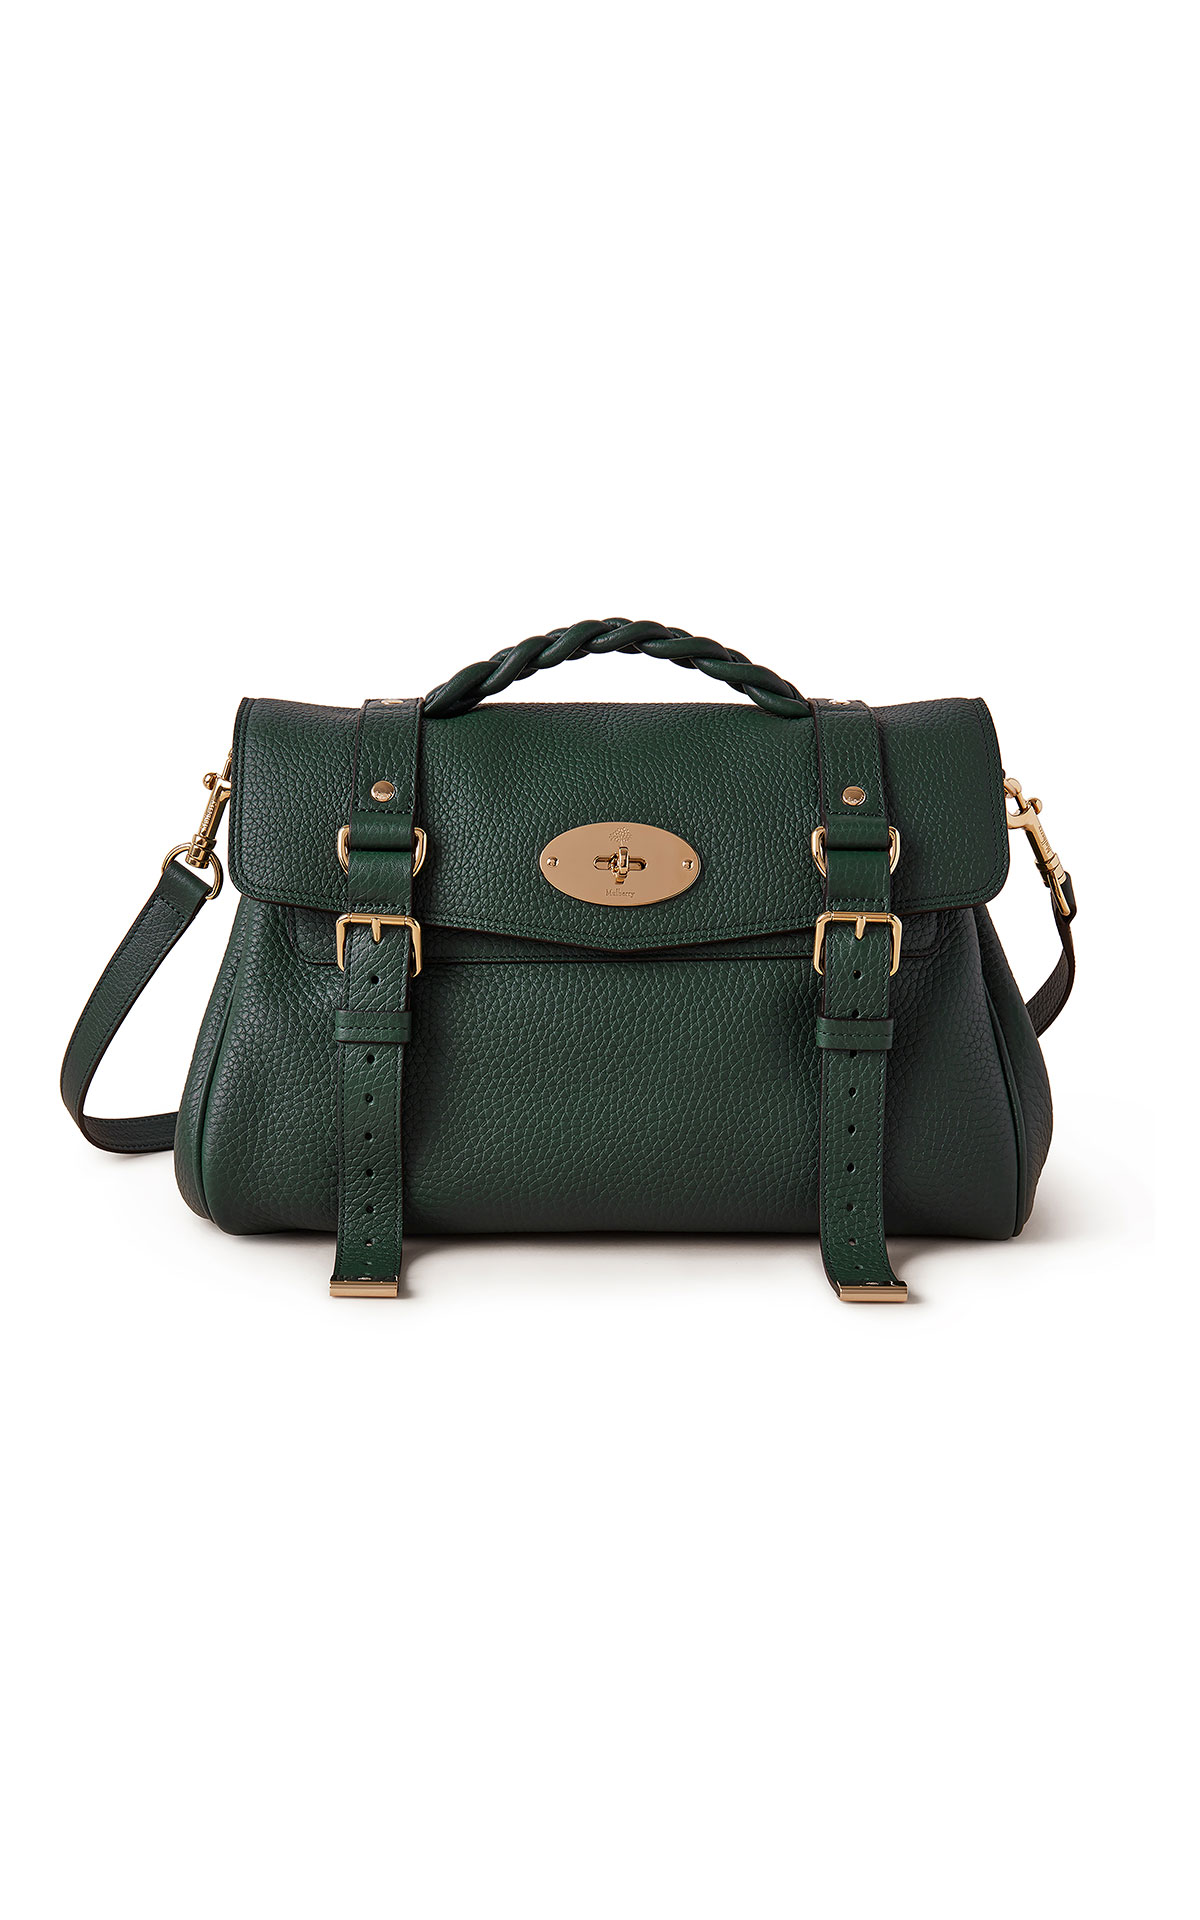 Mulberry Alexa heavy grain green bag from Bicester Village